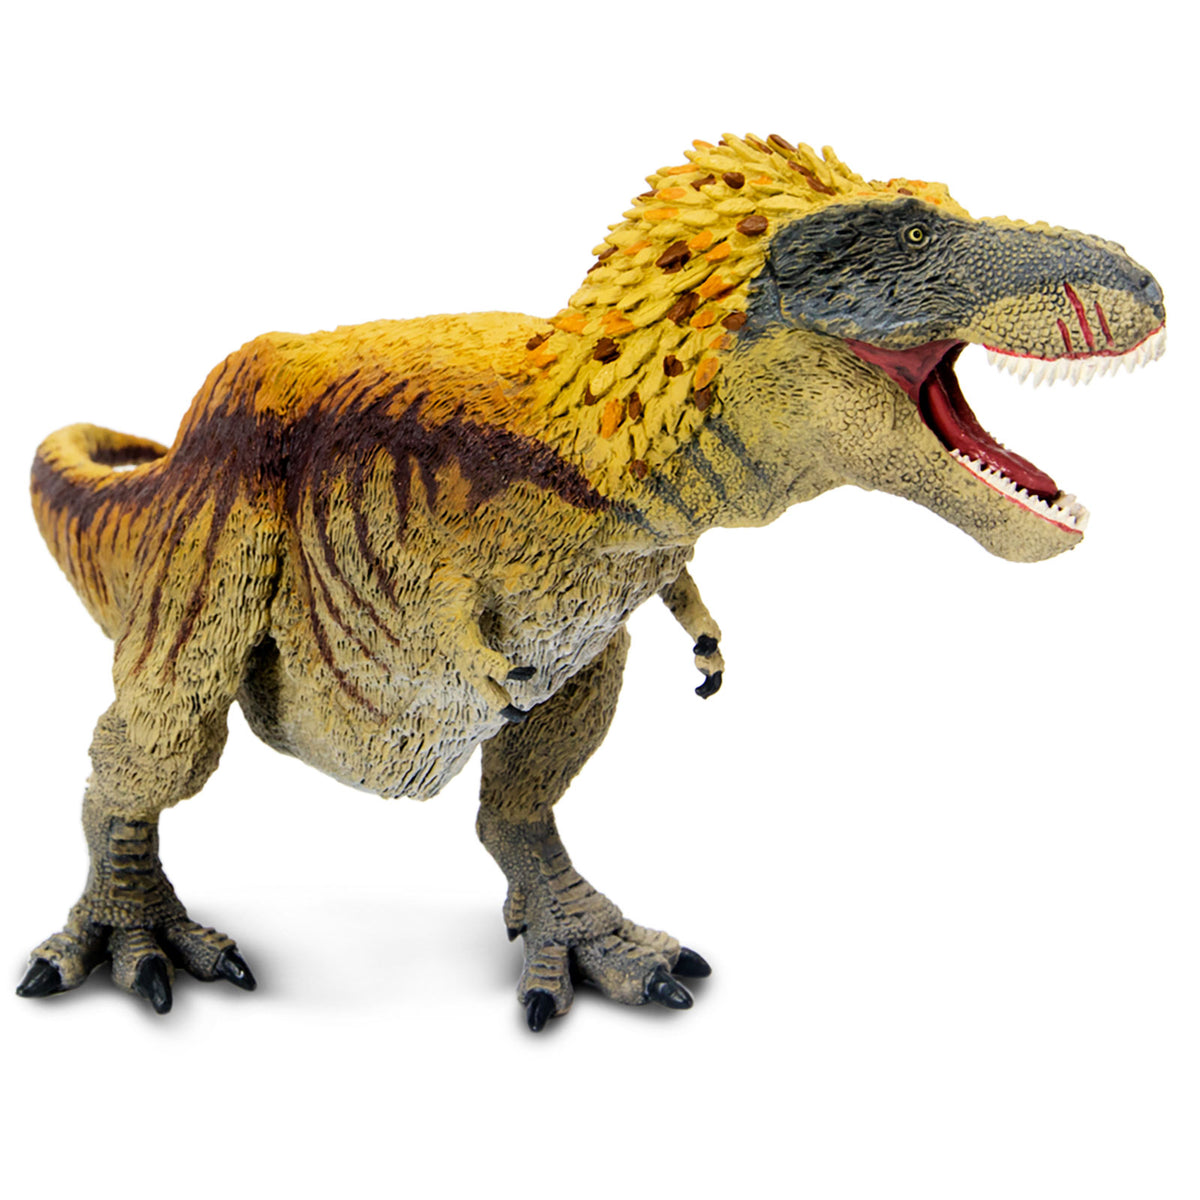 Learning and Exploring Through Play: Schleich Dinosaurs Review